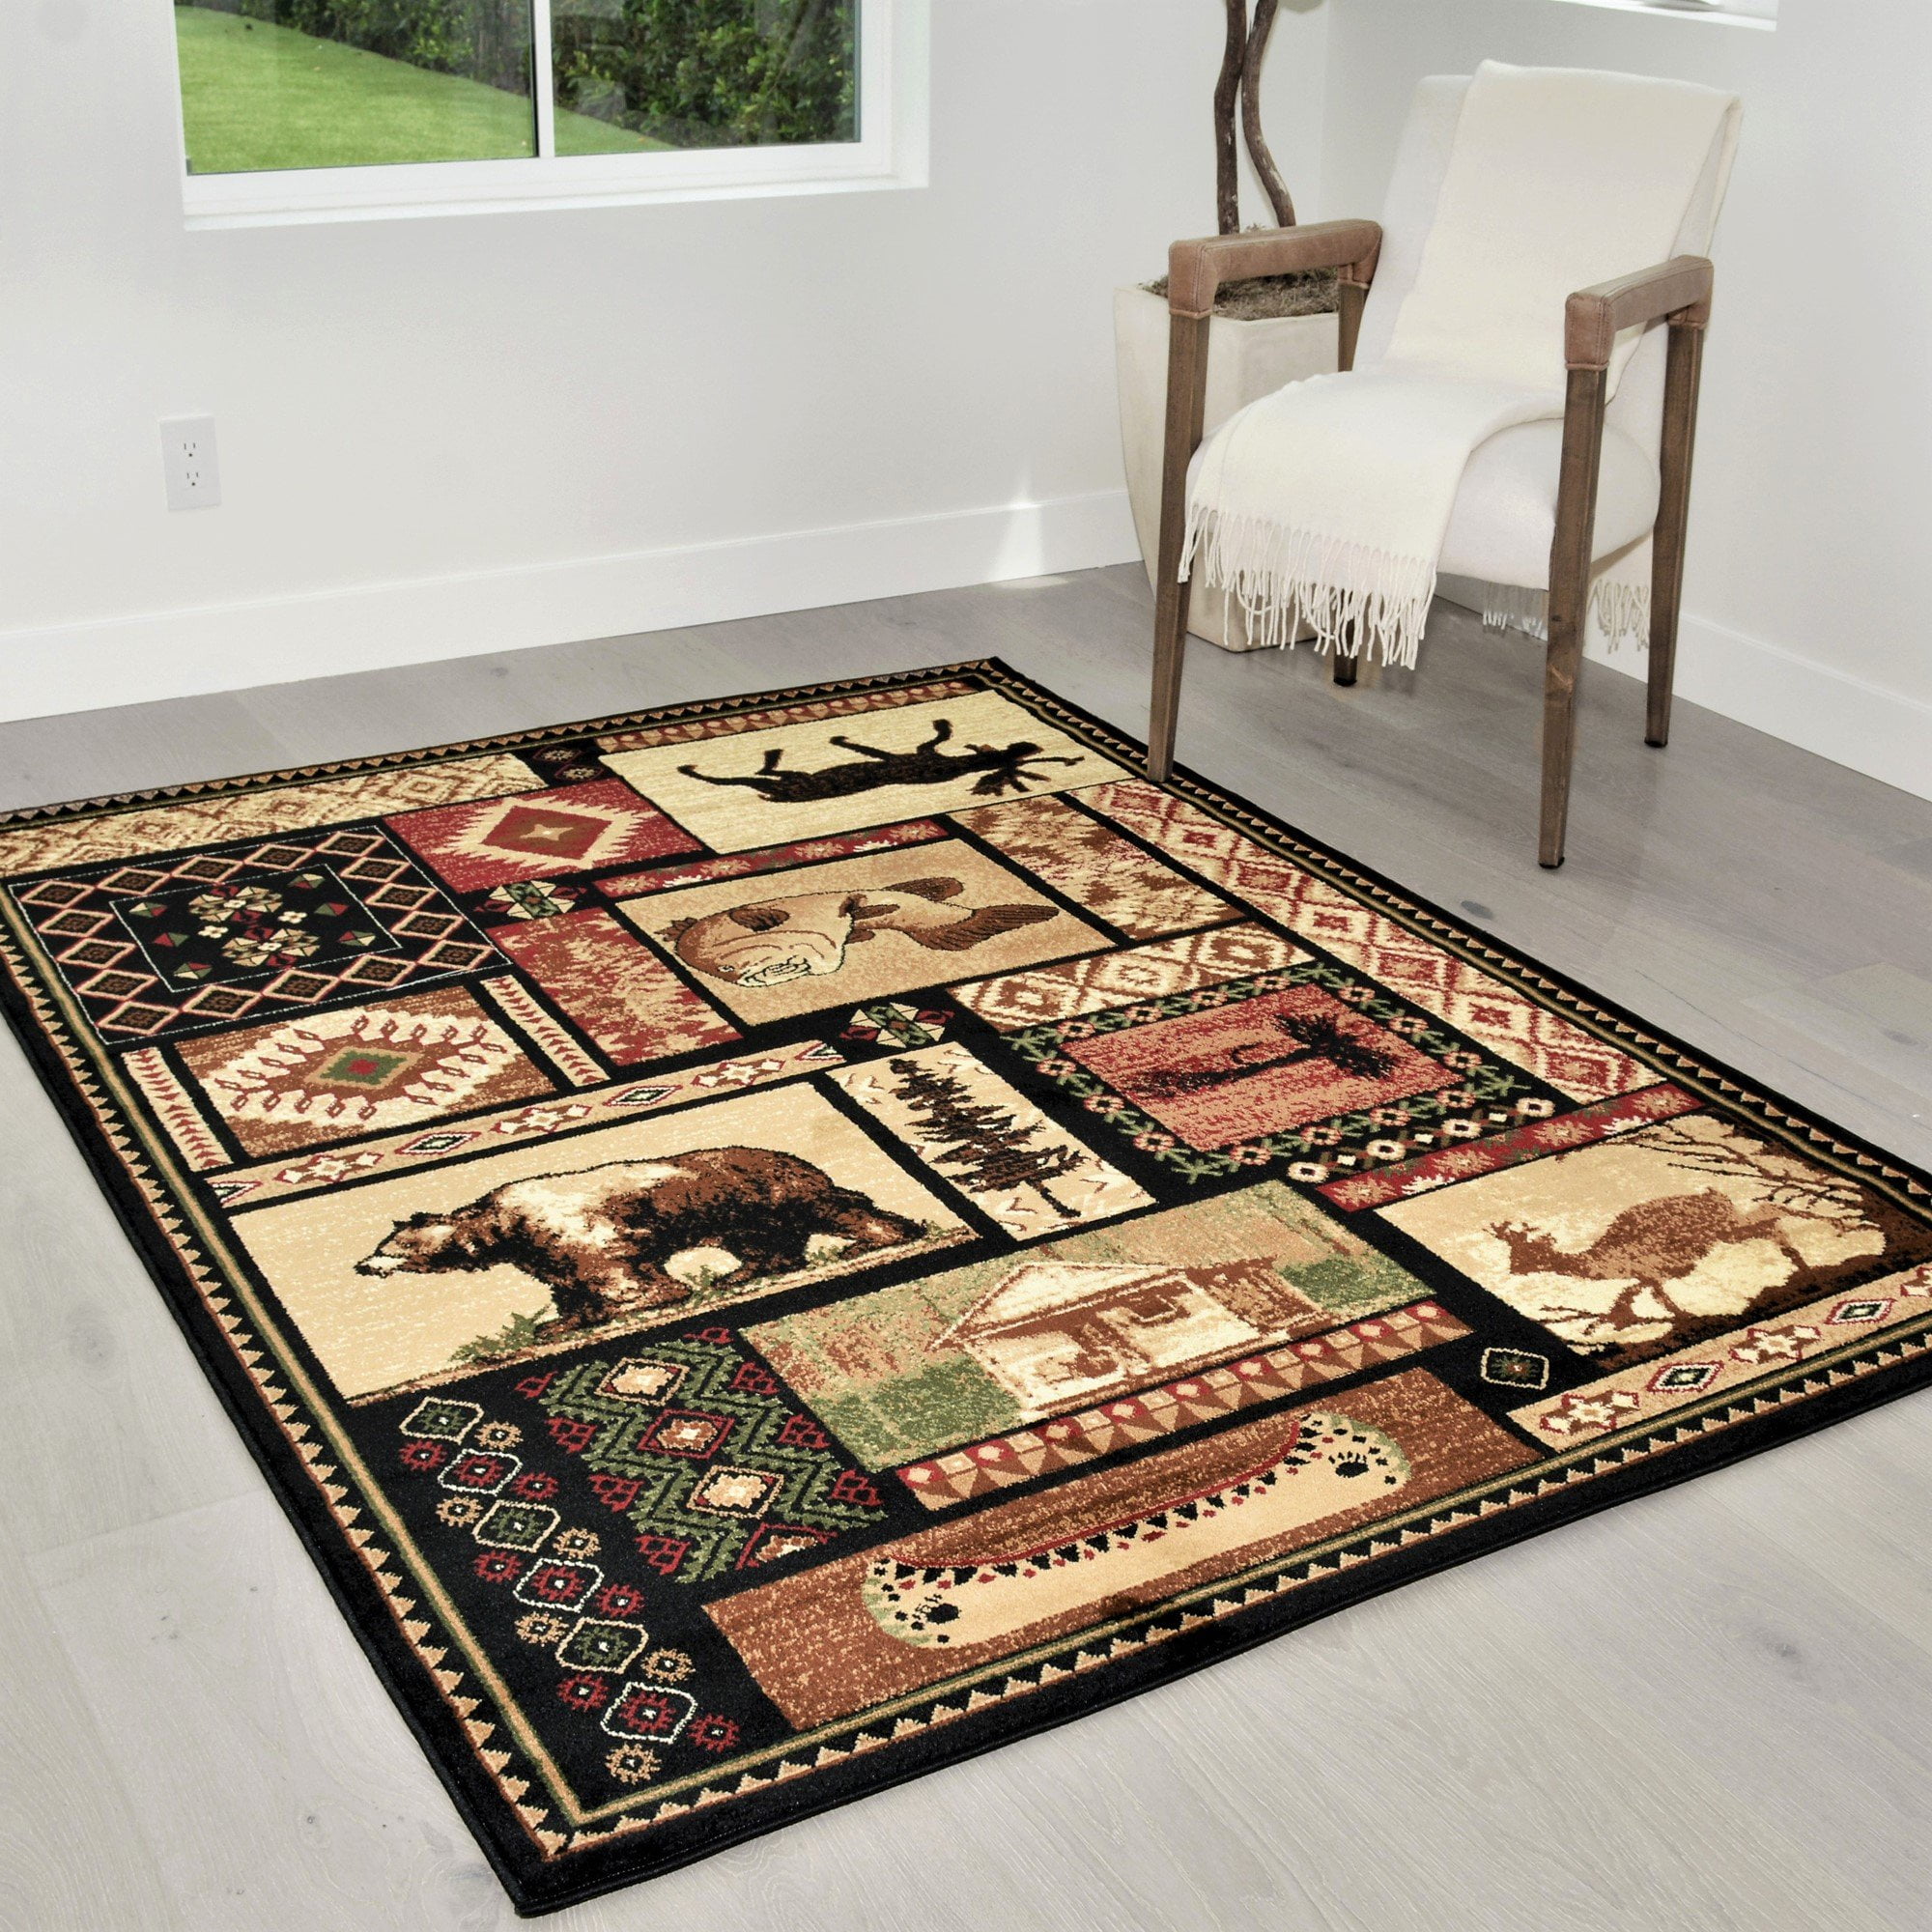 Approx 2' 7" x7' 3" 2x7 Nature Print Brown Cabin Fishing 6620 Runner Area Rug 